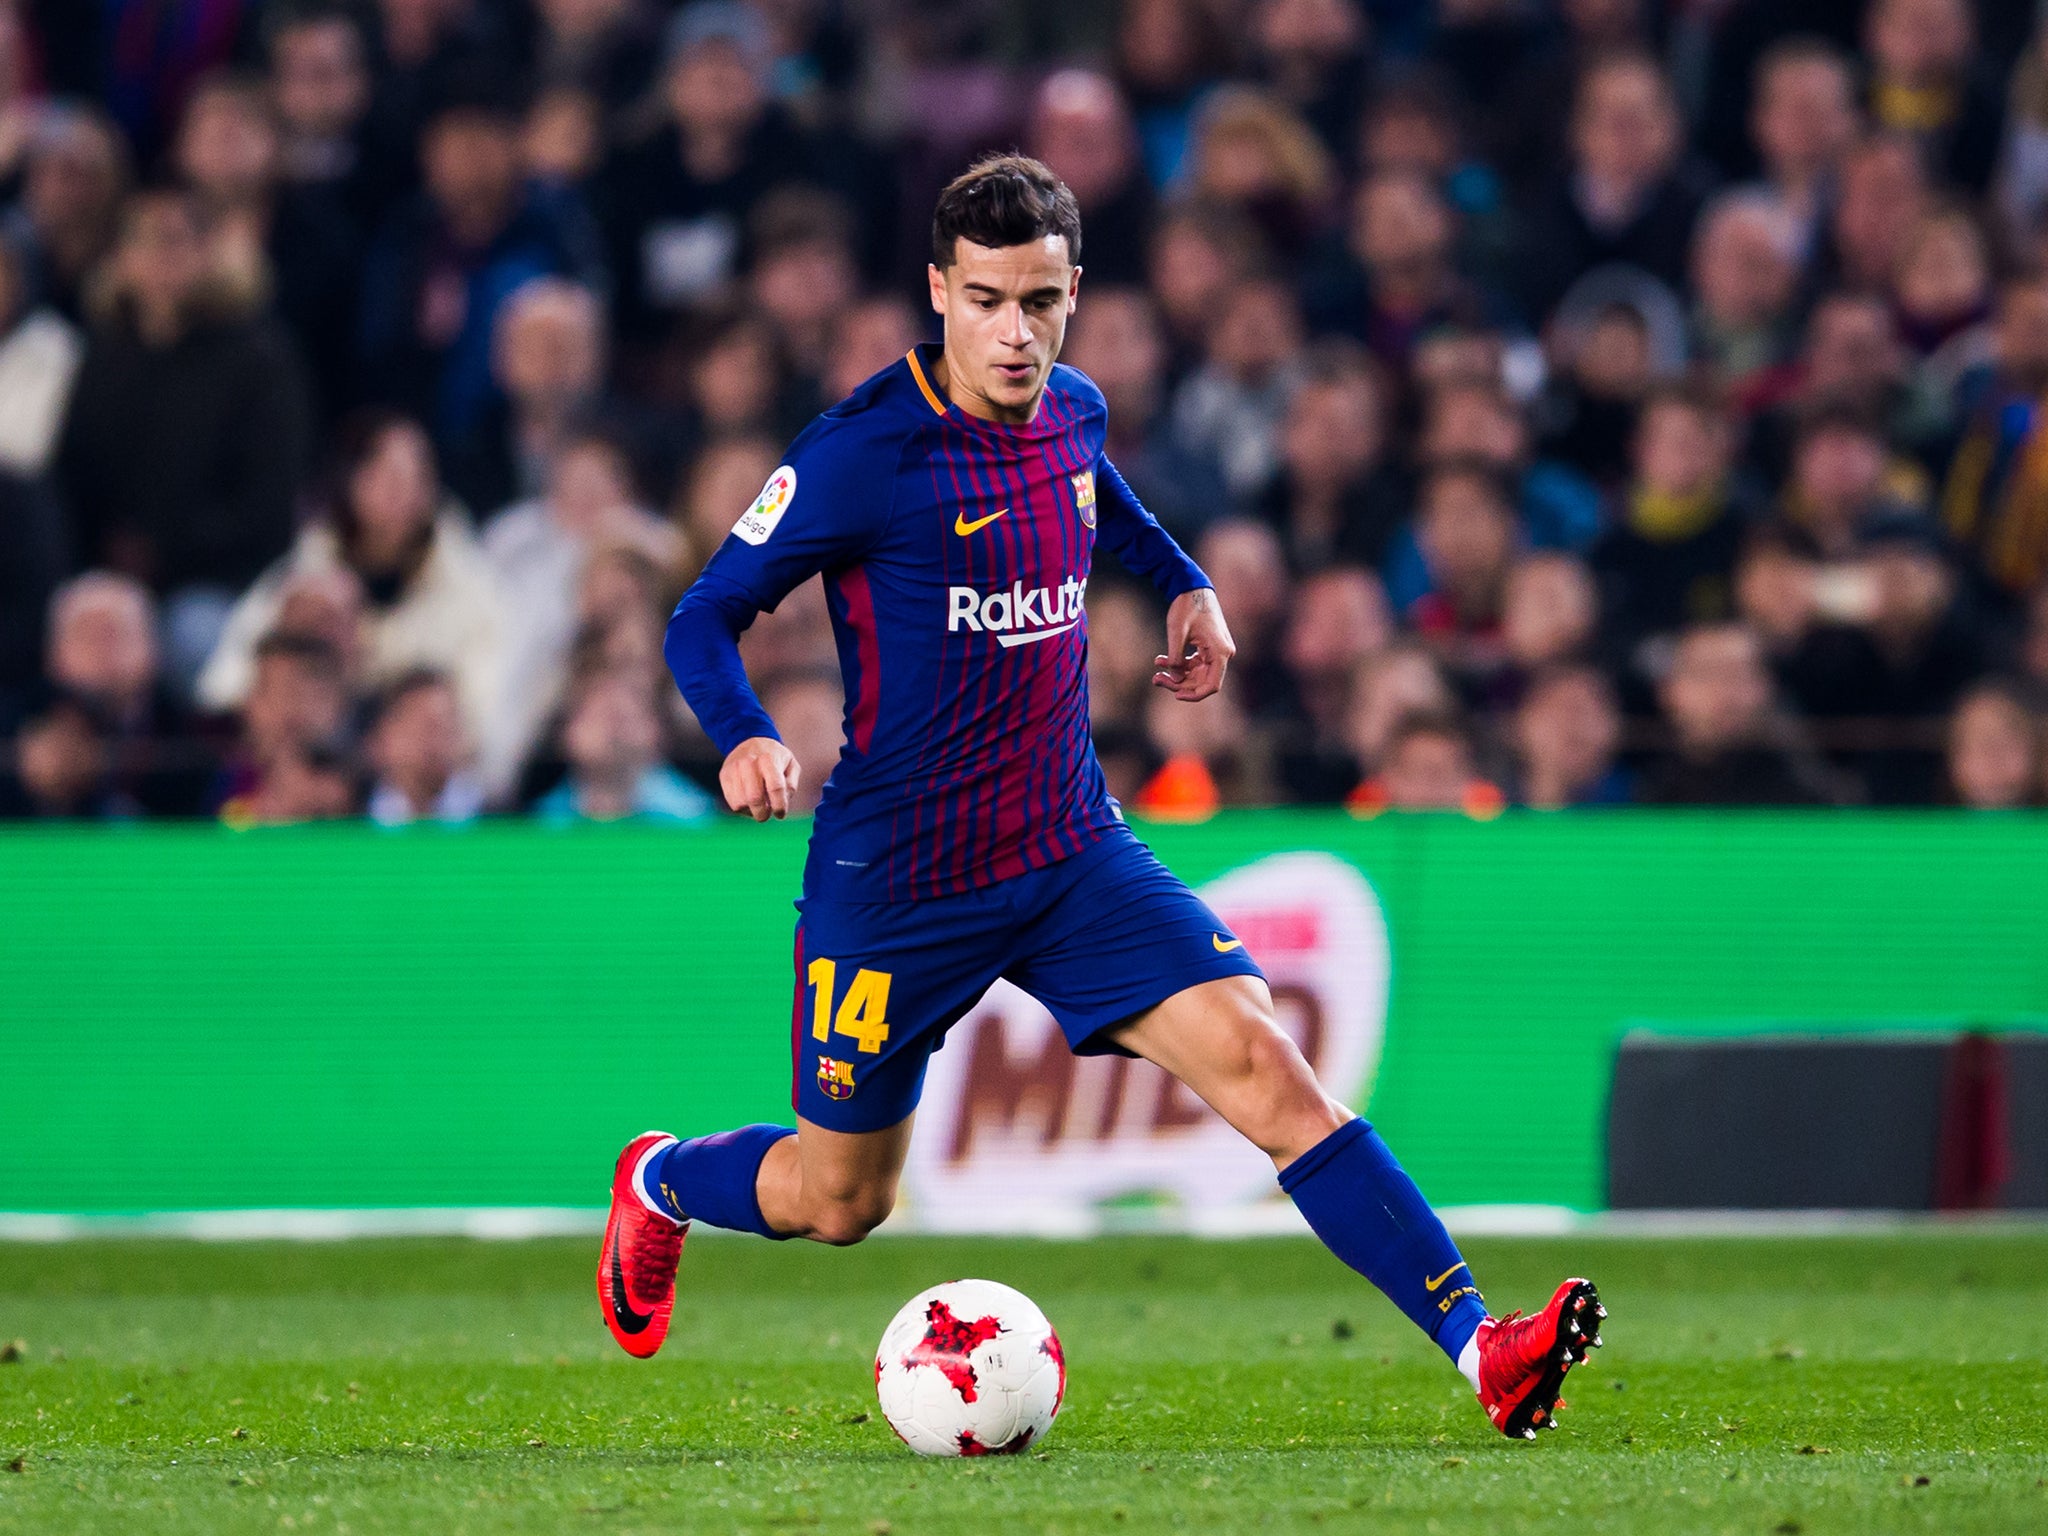 &#13;
Coutinho has hit his stride in La Liga and faces Real this weekend in good form &#13;